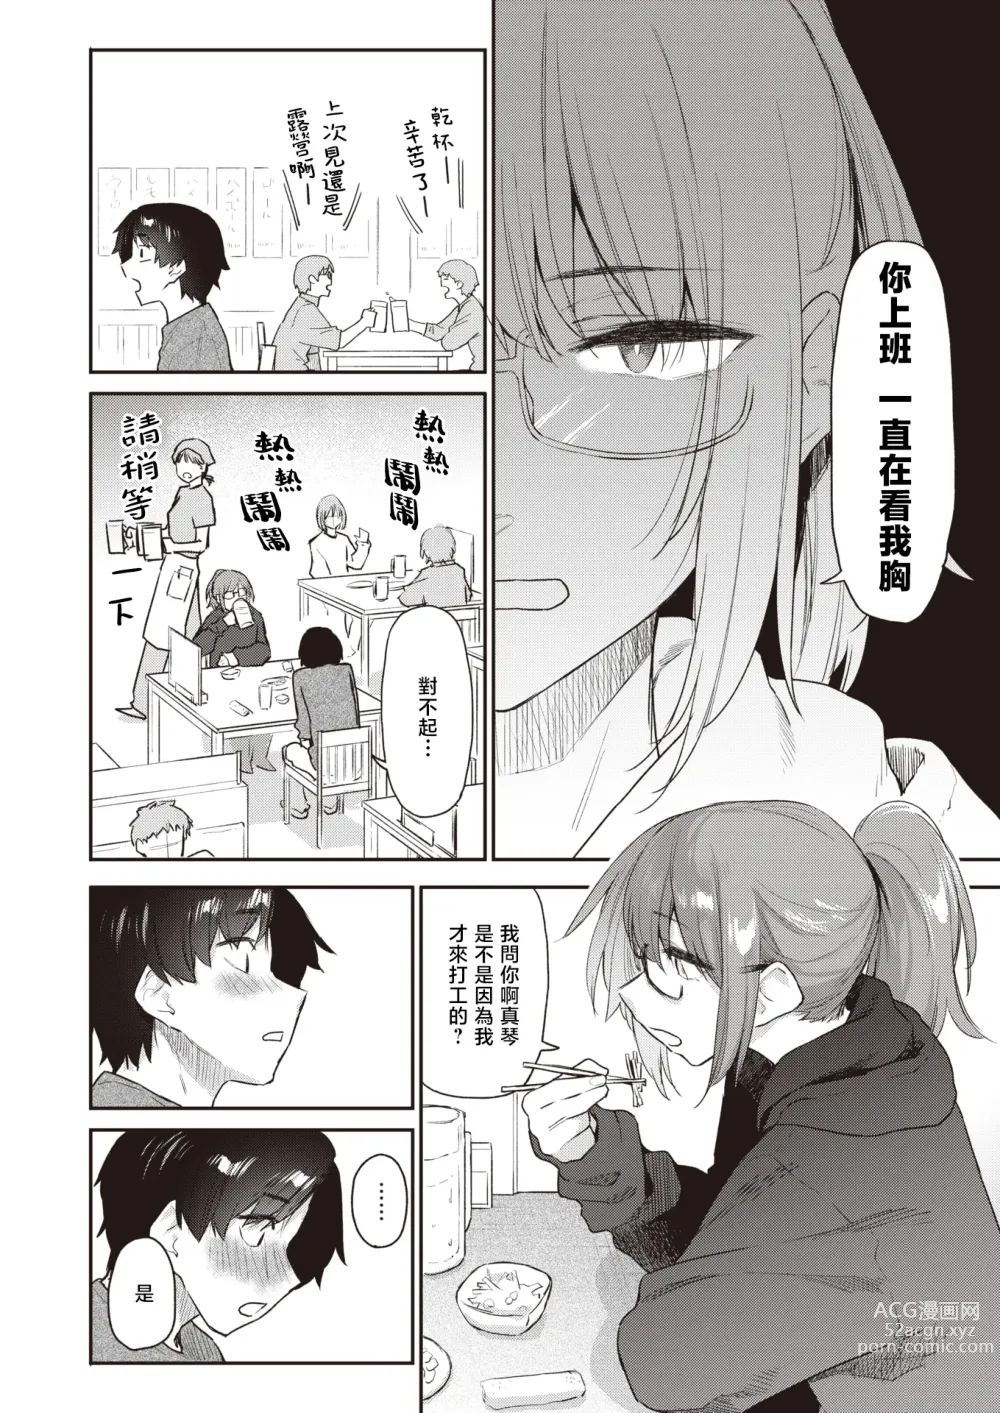 Page 6 of doujinshi 自用